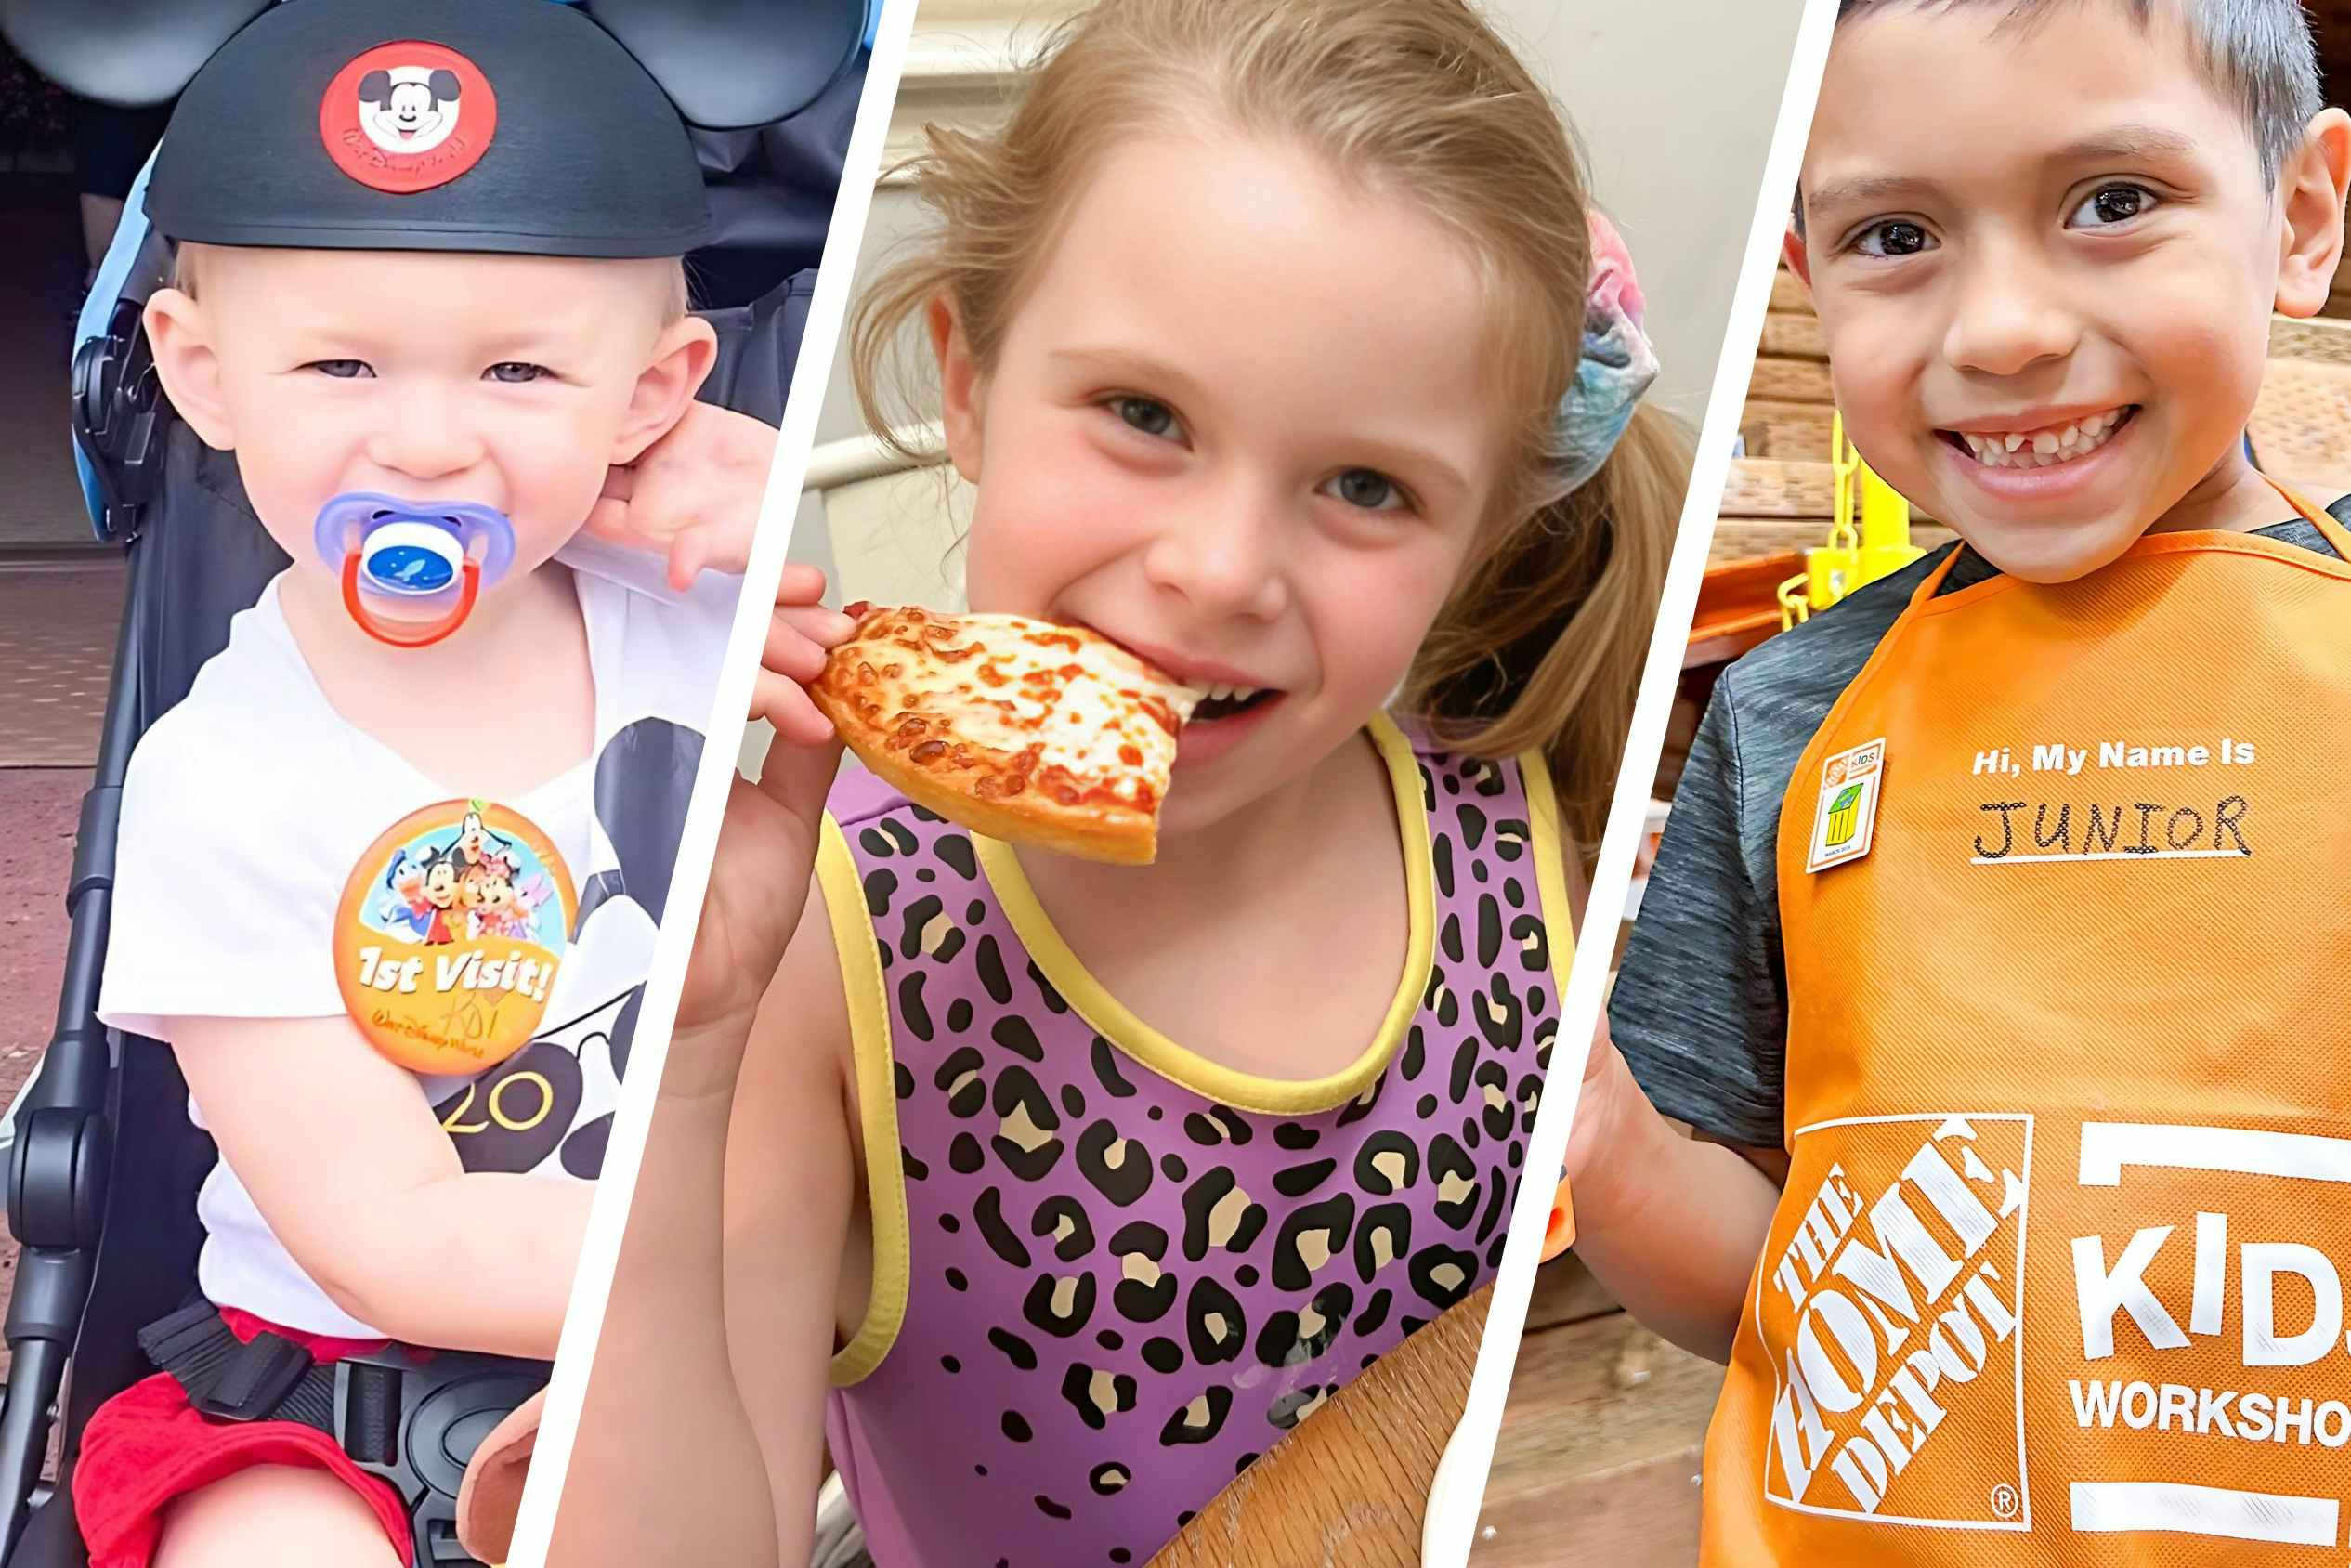 Three images for kids freebies, one at disneyworld, one eating pizza hut, one at home depot kids workshop 